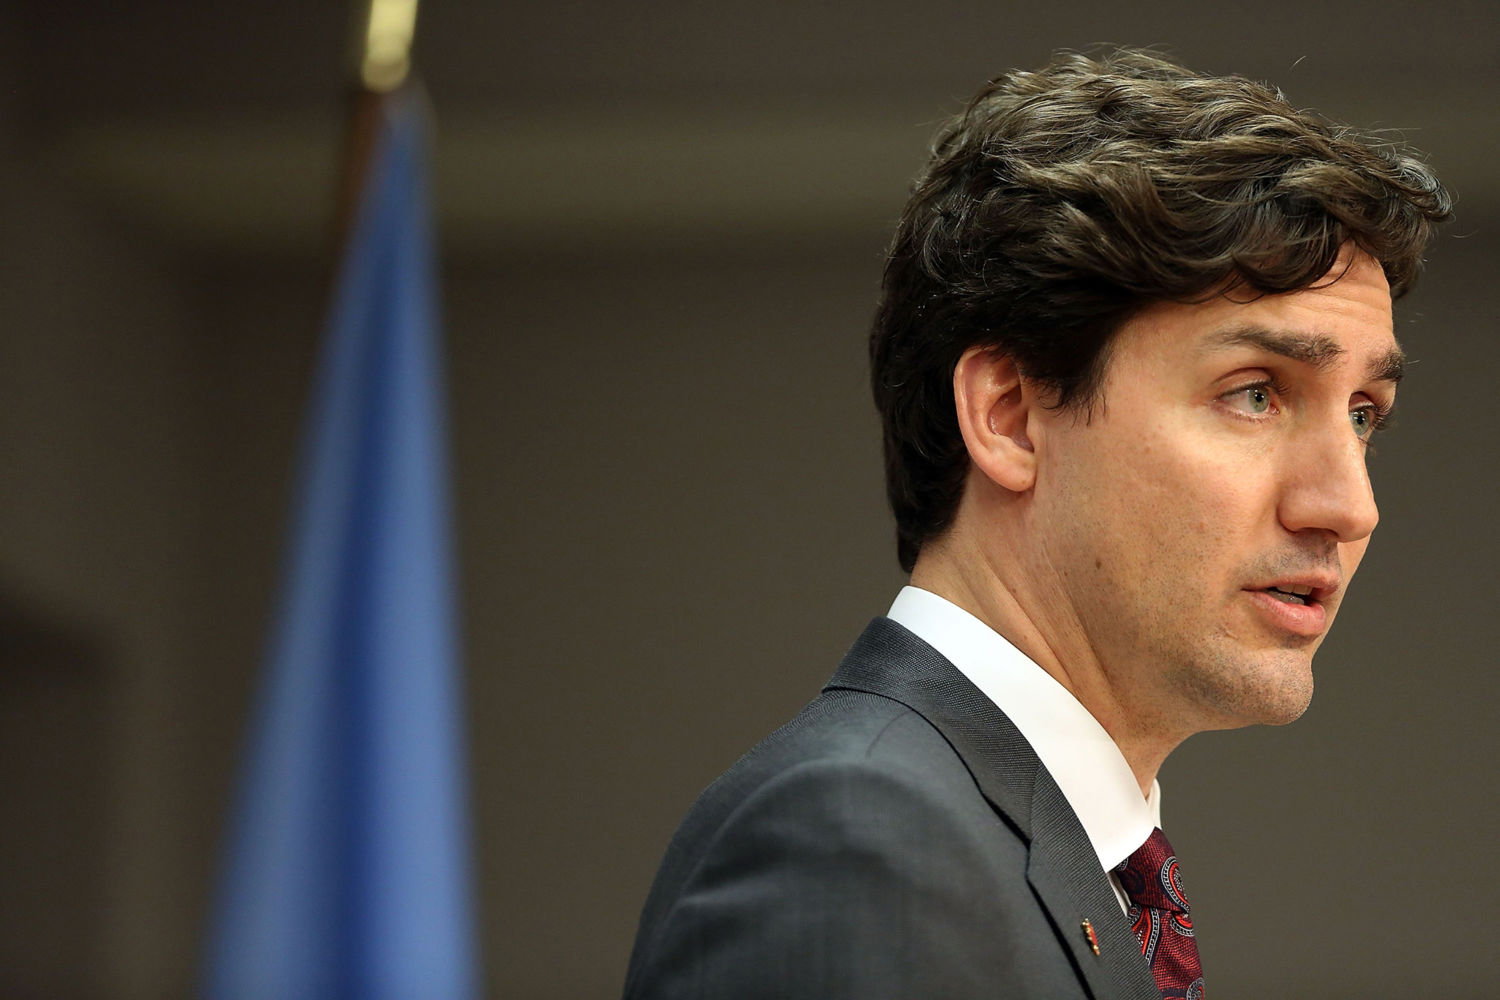 Canada’s Trudeau is Under Fire For His Record on Green Issues Yale E360